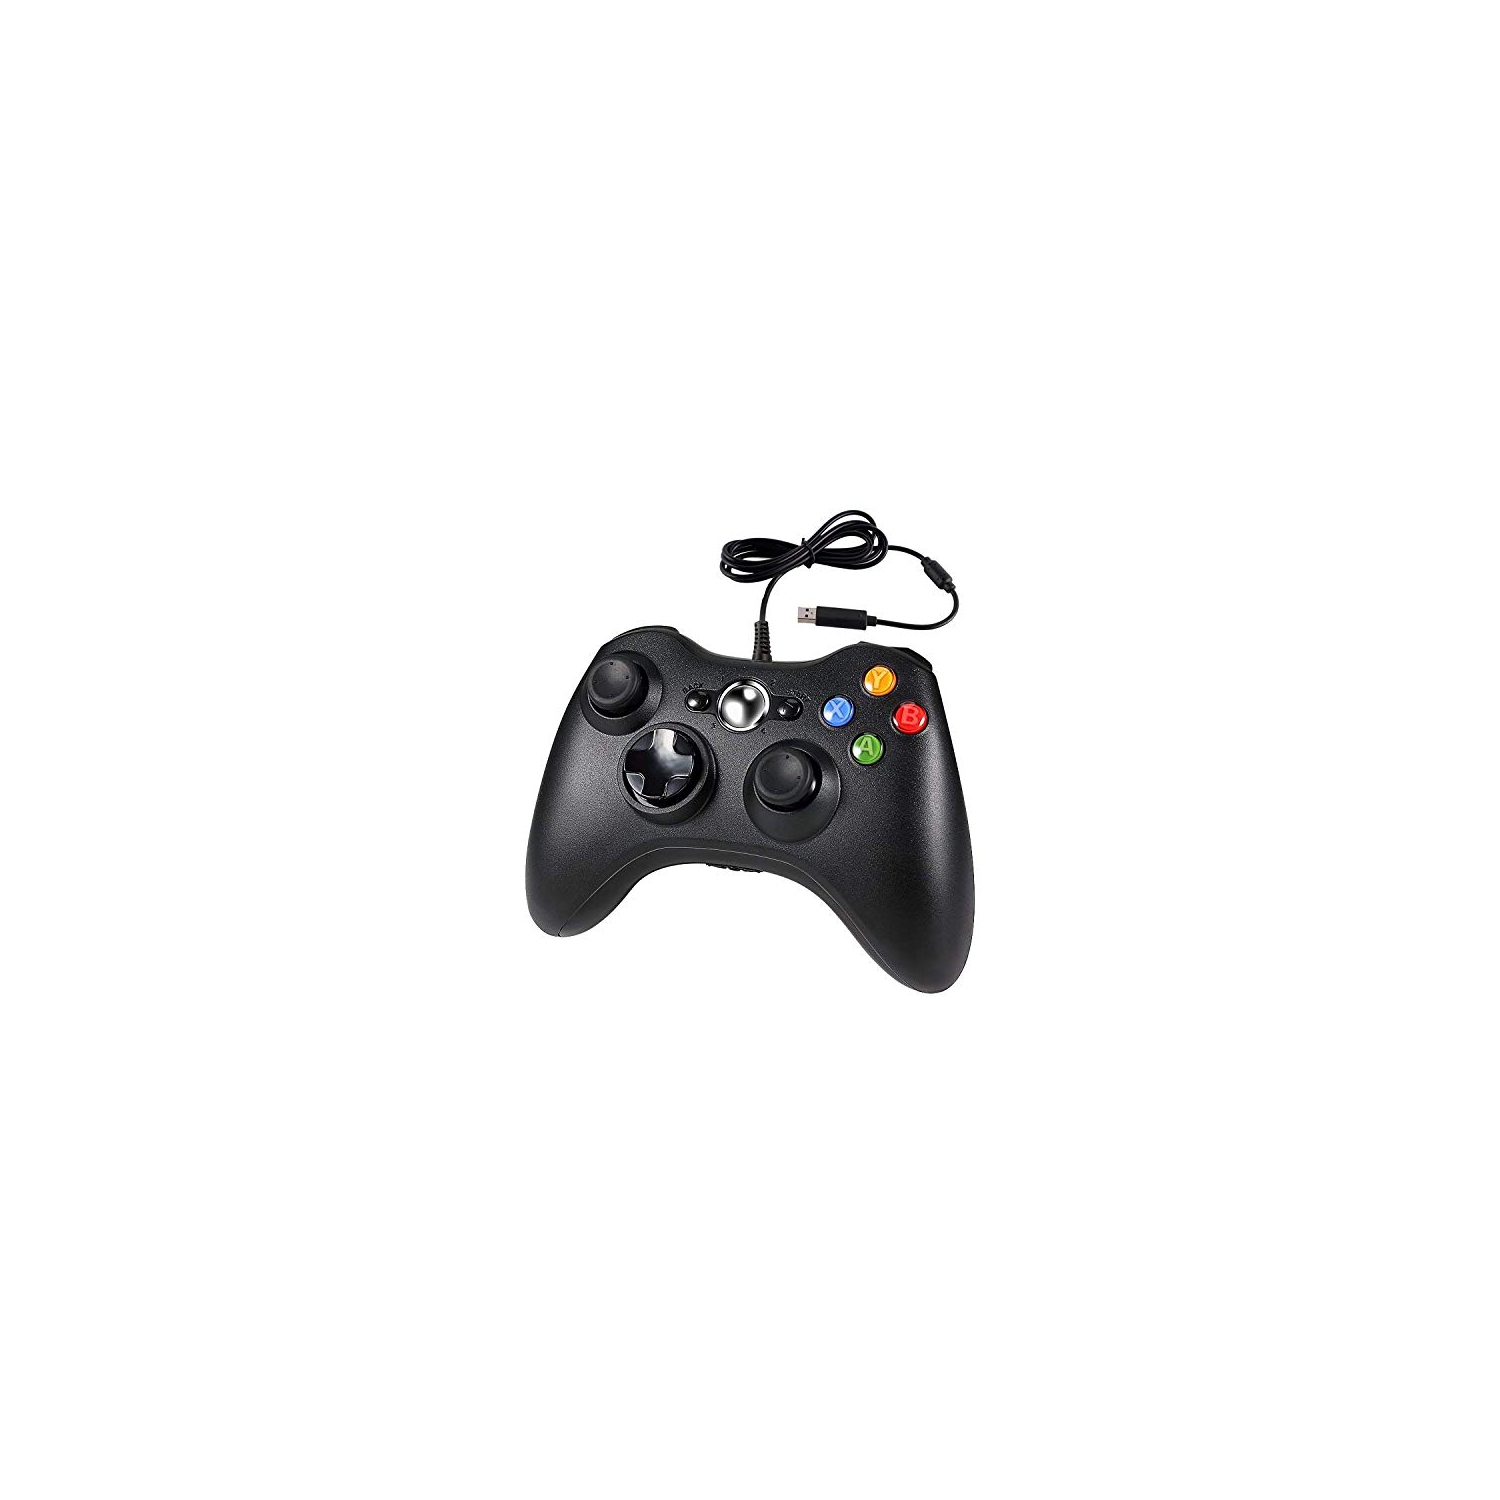 YCCSKY Xbox 360 Controller, 360 Wired Controller 2.4GHZ Game Joystick Controller Gamepad Remote for Xbox 360 Slim Console...